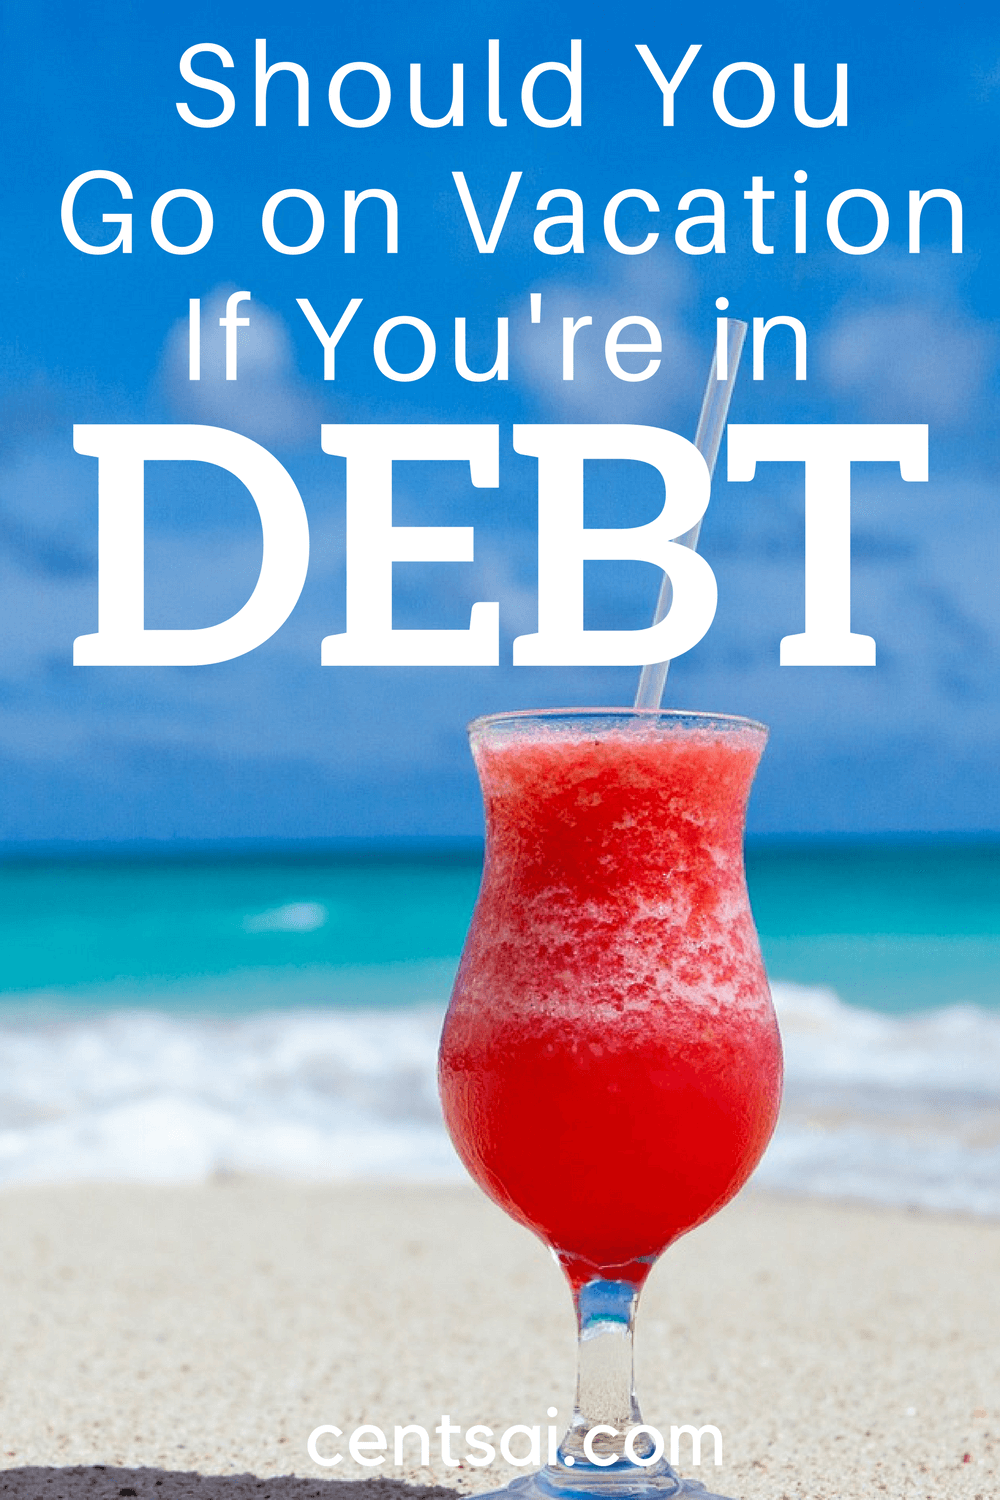 Should You Go on Vacation If You're in Debt? Not all kinds of debt should prevent you from going on vacation, but you should take your finances into consideration before traveling.